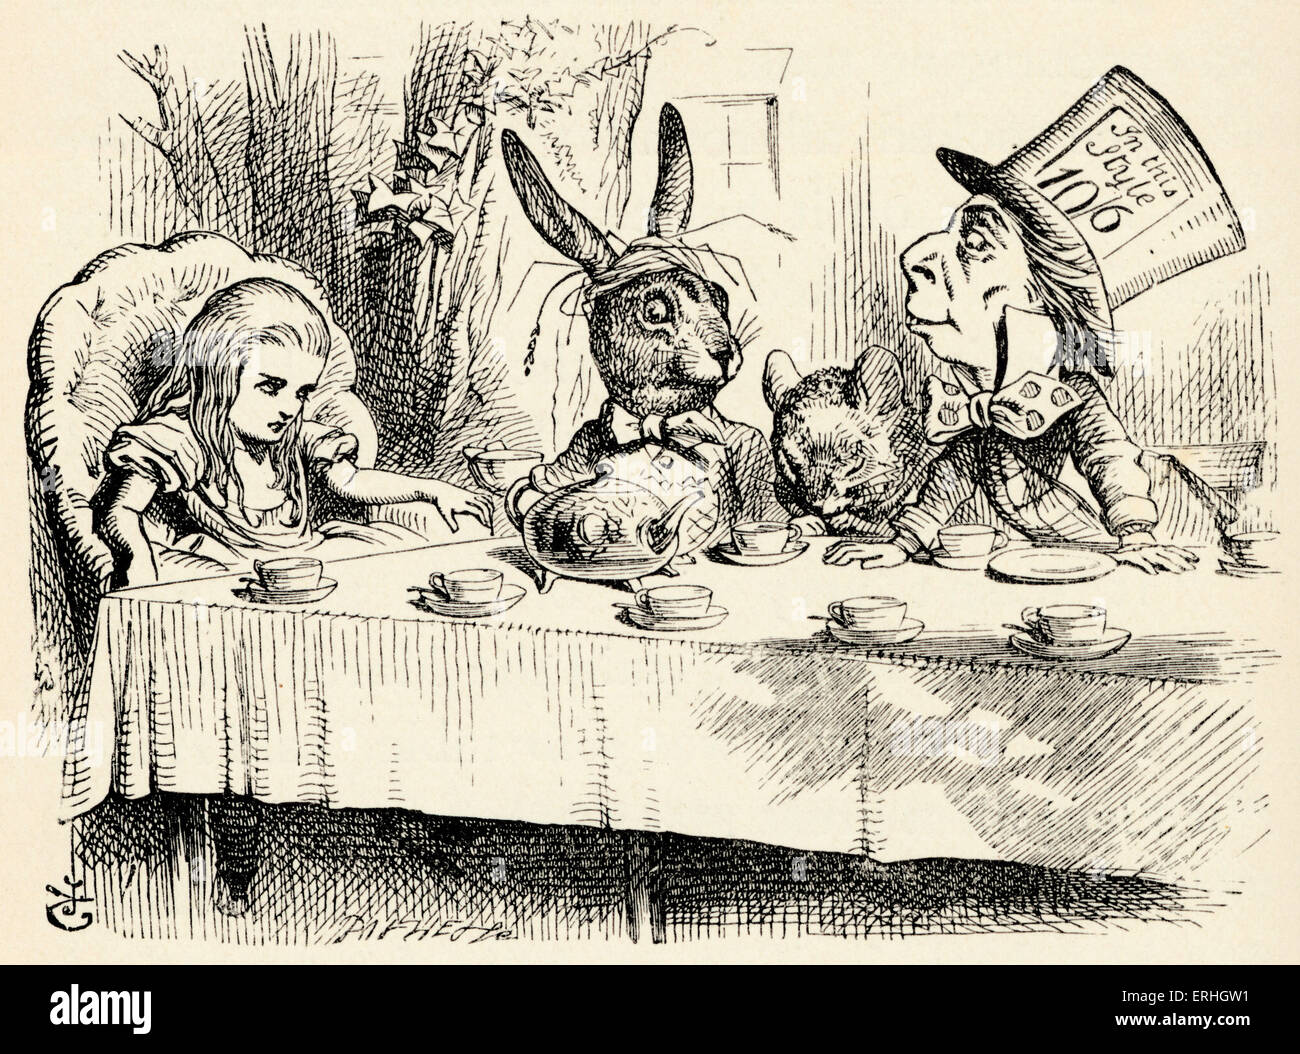 Alice in Wonderland - the Mad Hatter's Tea Party - from the book by Lewis Carroll (Charles Lutwidge Dodgson), English children's writer and mathematician 27 January 1832- 14 January 1898. First published 1865. Illustrations by John Tenniel 1820-1914. Stock Photo